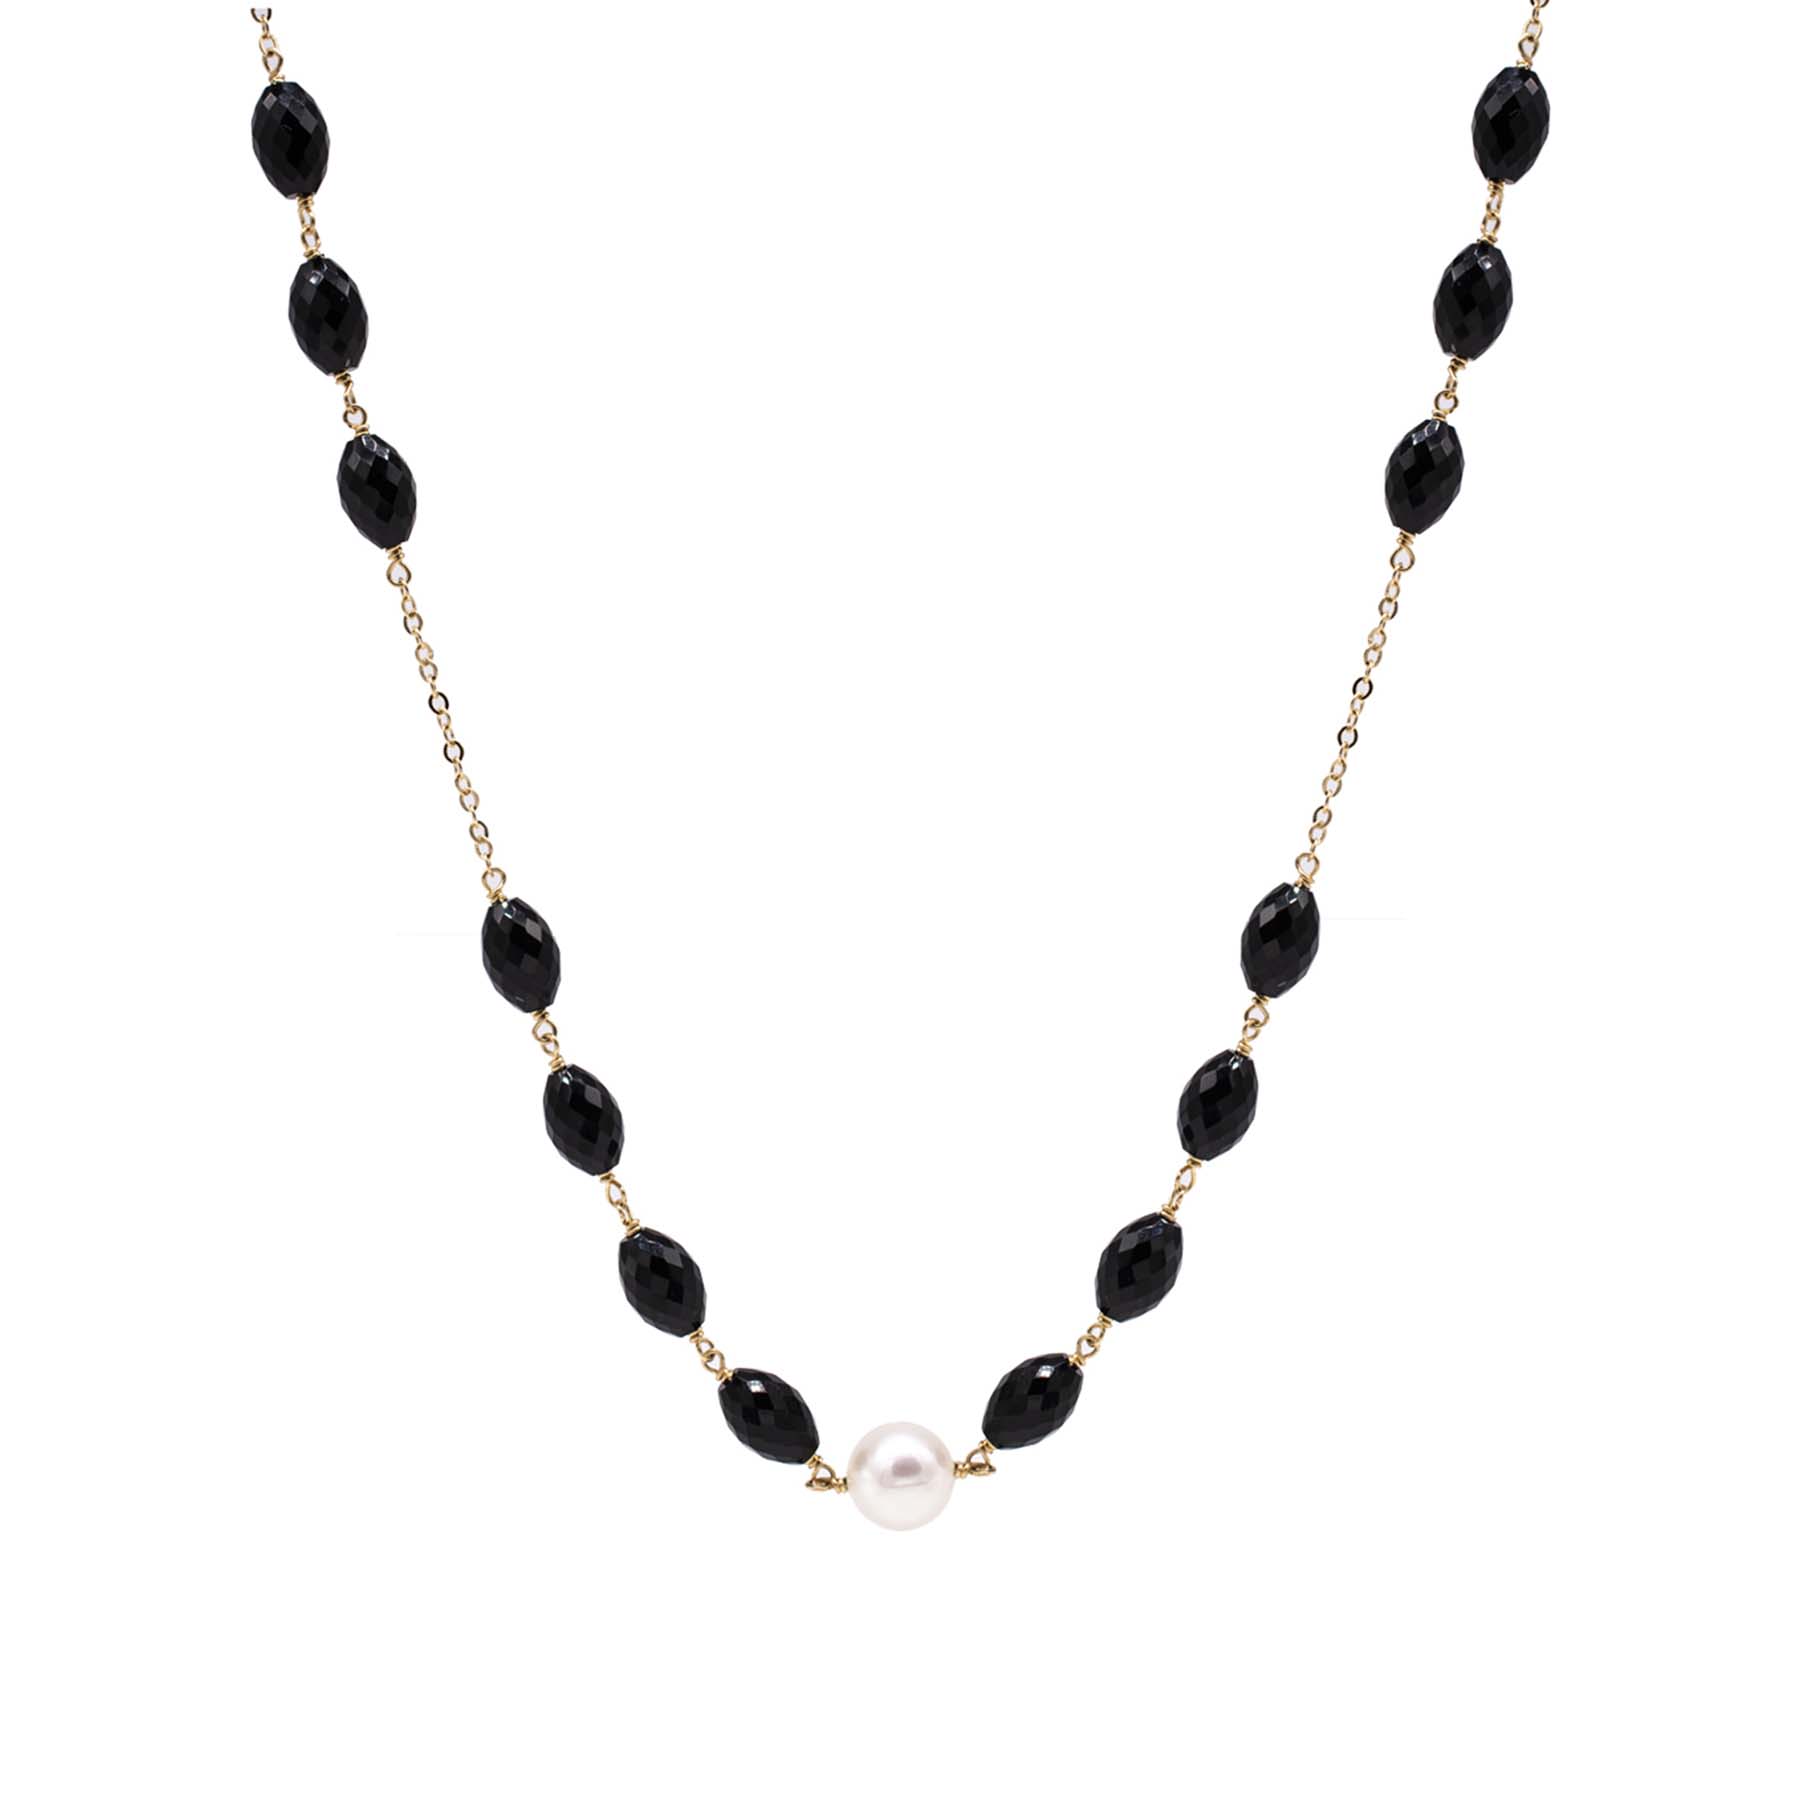 14k Black Onyx White Freshwater Pearl Link Necklace 18"